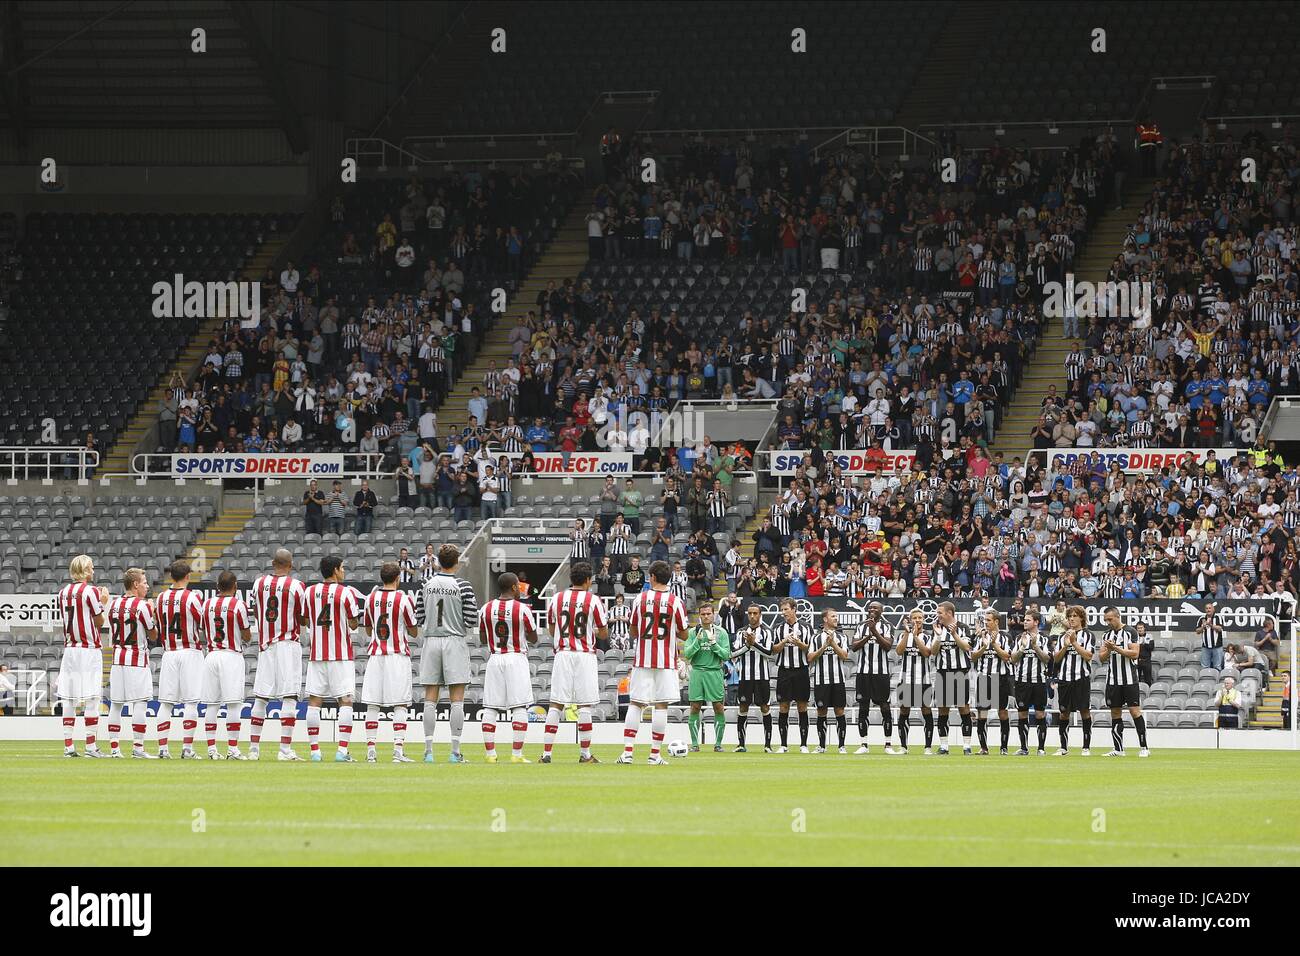 A MINUTES APPLAUSE IN MEMORY O NEWCASTLE UNITED V PSV ST.JAMES PARK NEWCASTLE ENGLAND 31 July 2010 Stock Photo